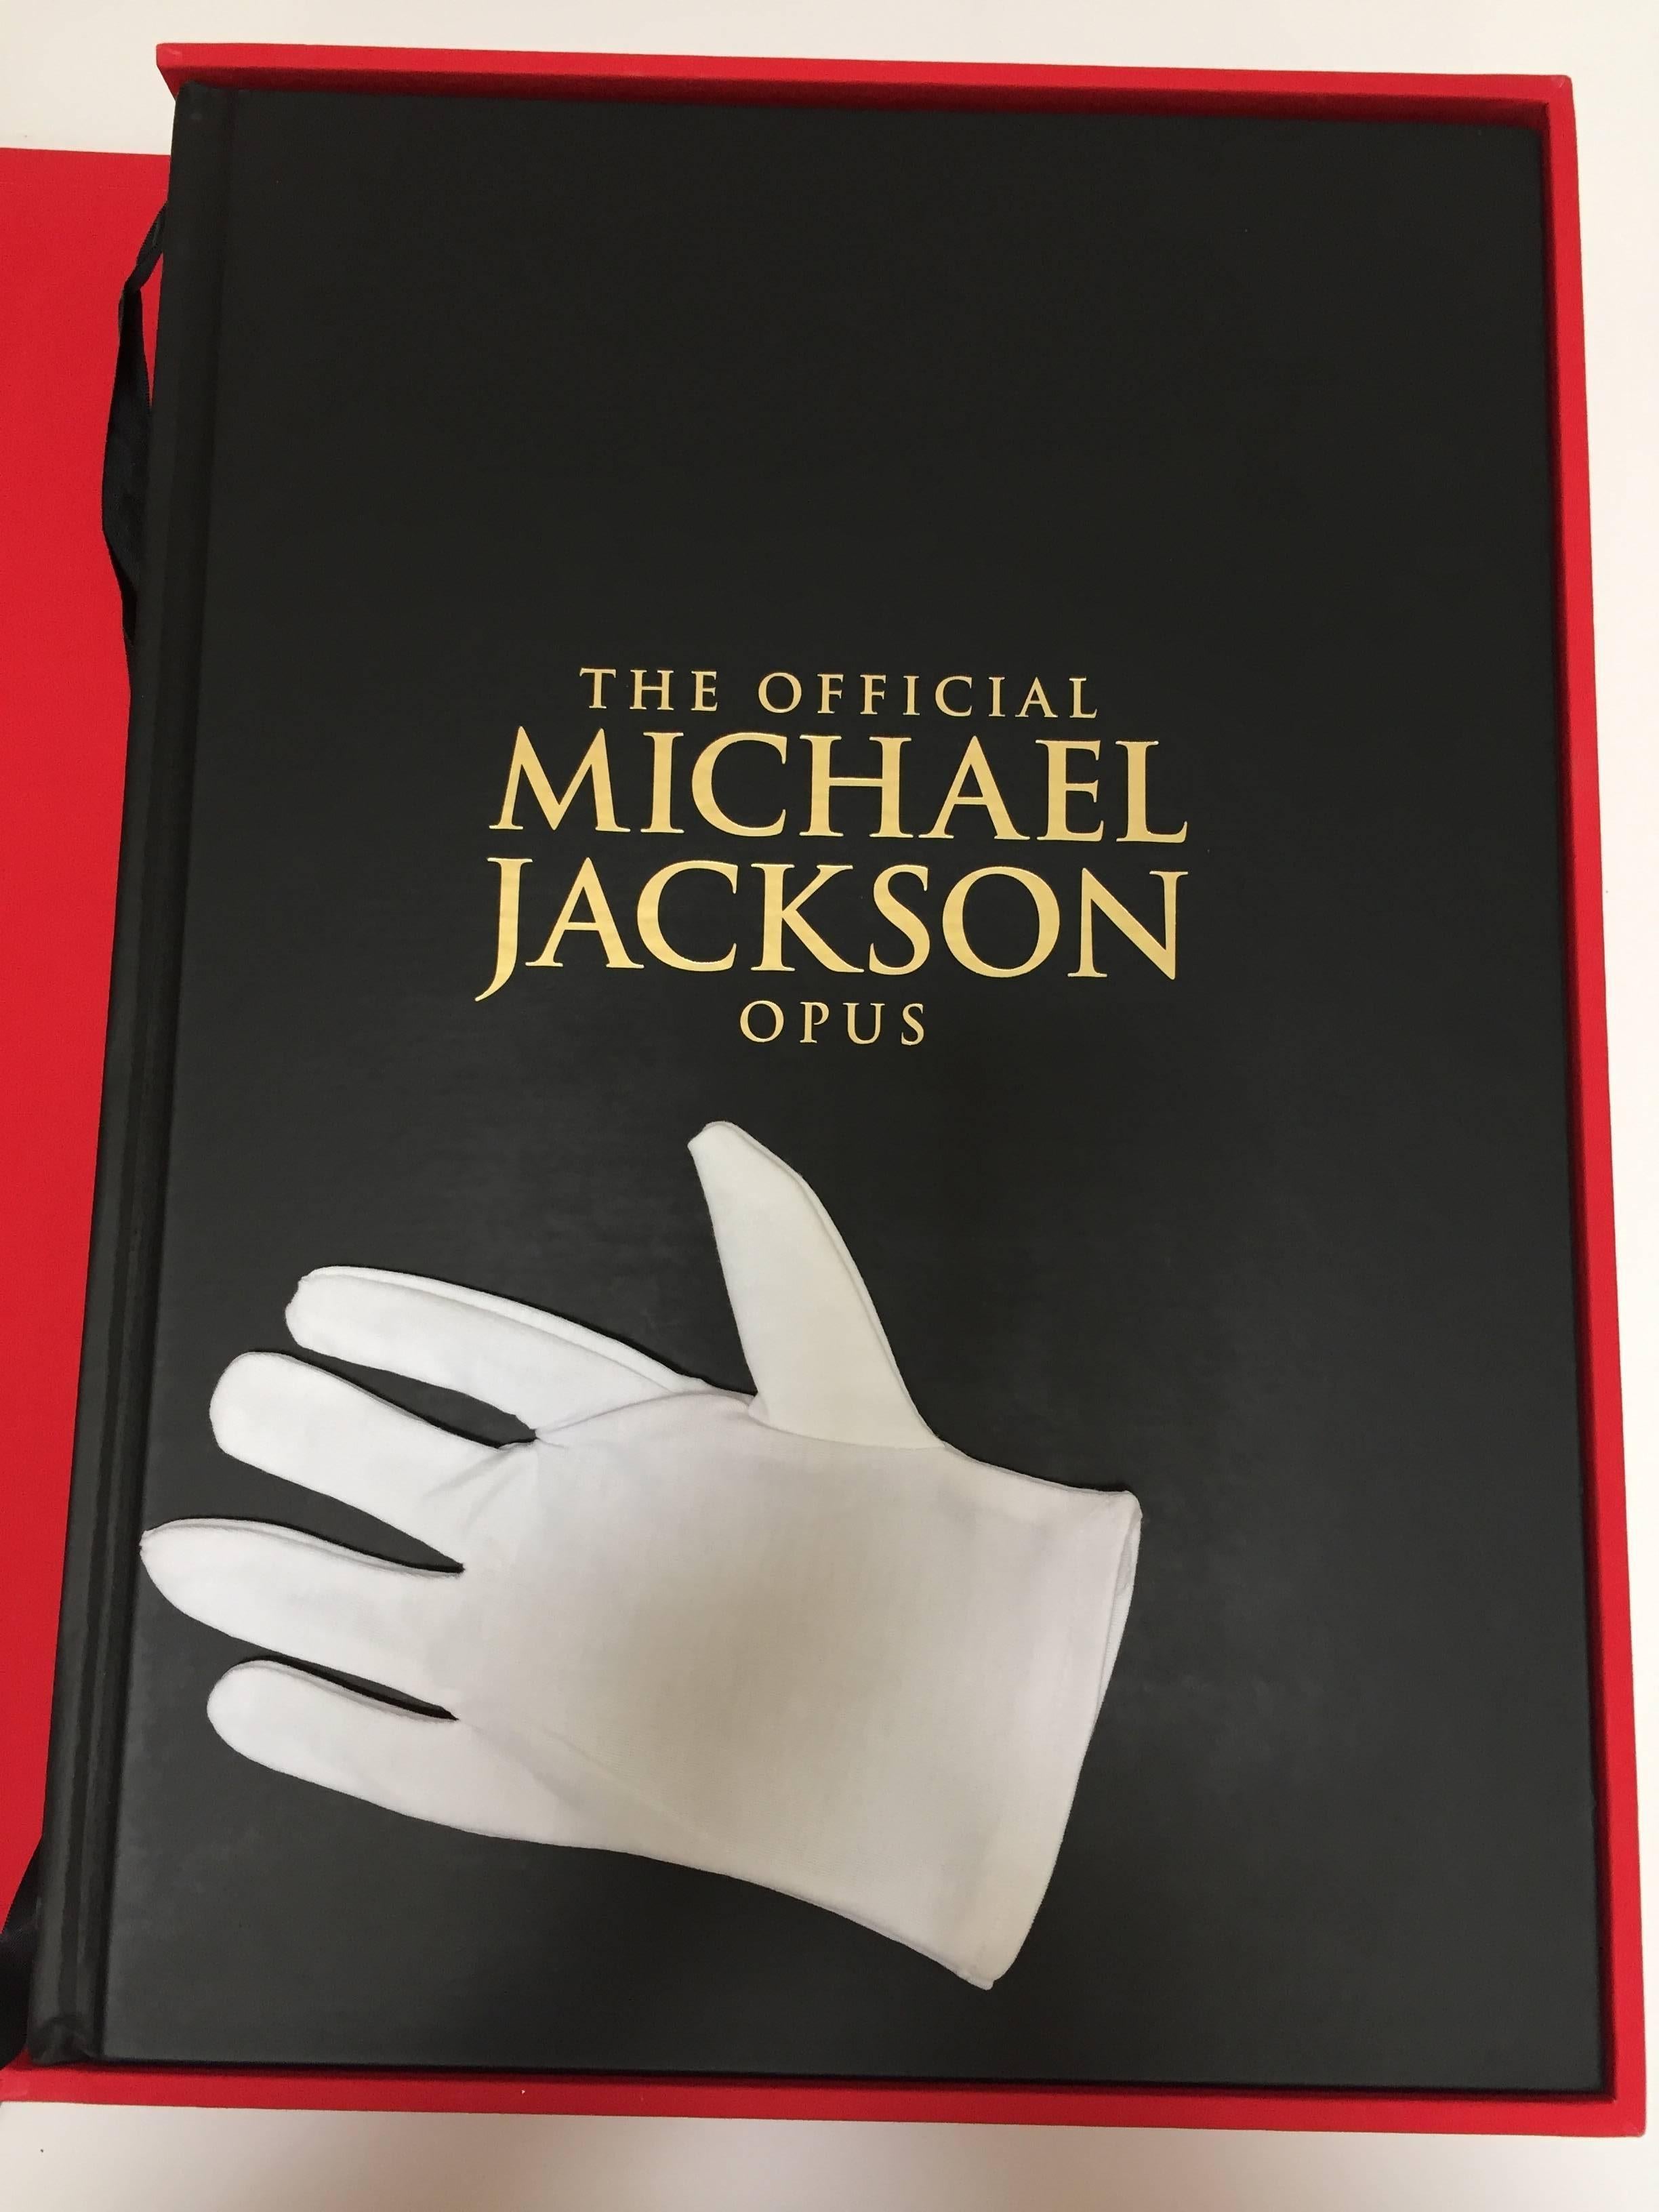 Michael Jackson Opus Large heavy collector coffee table book.
